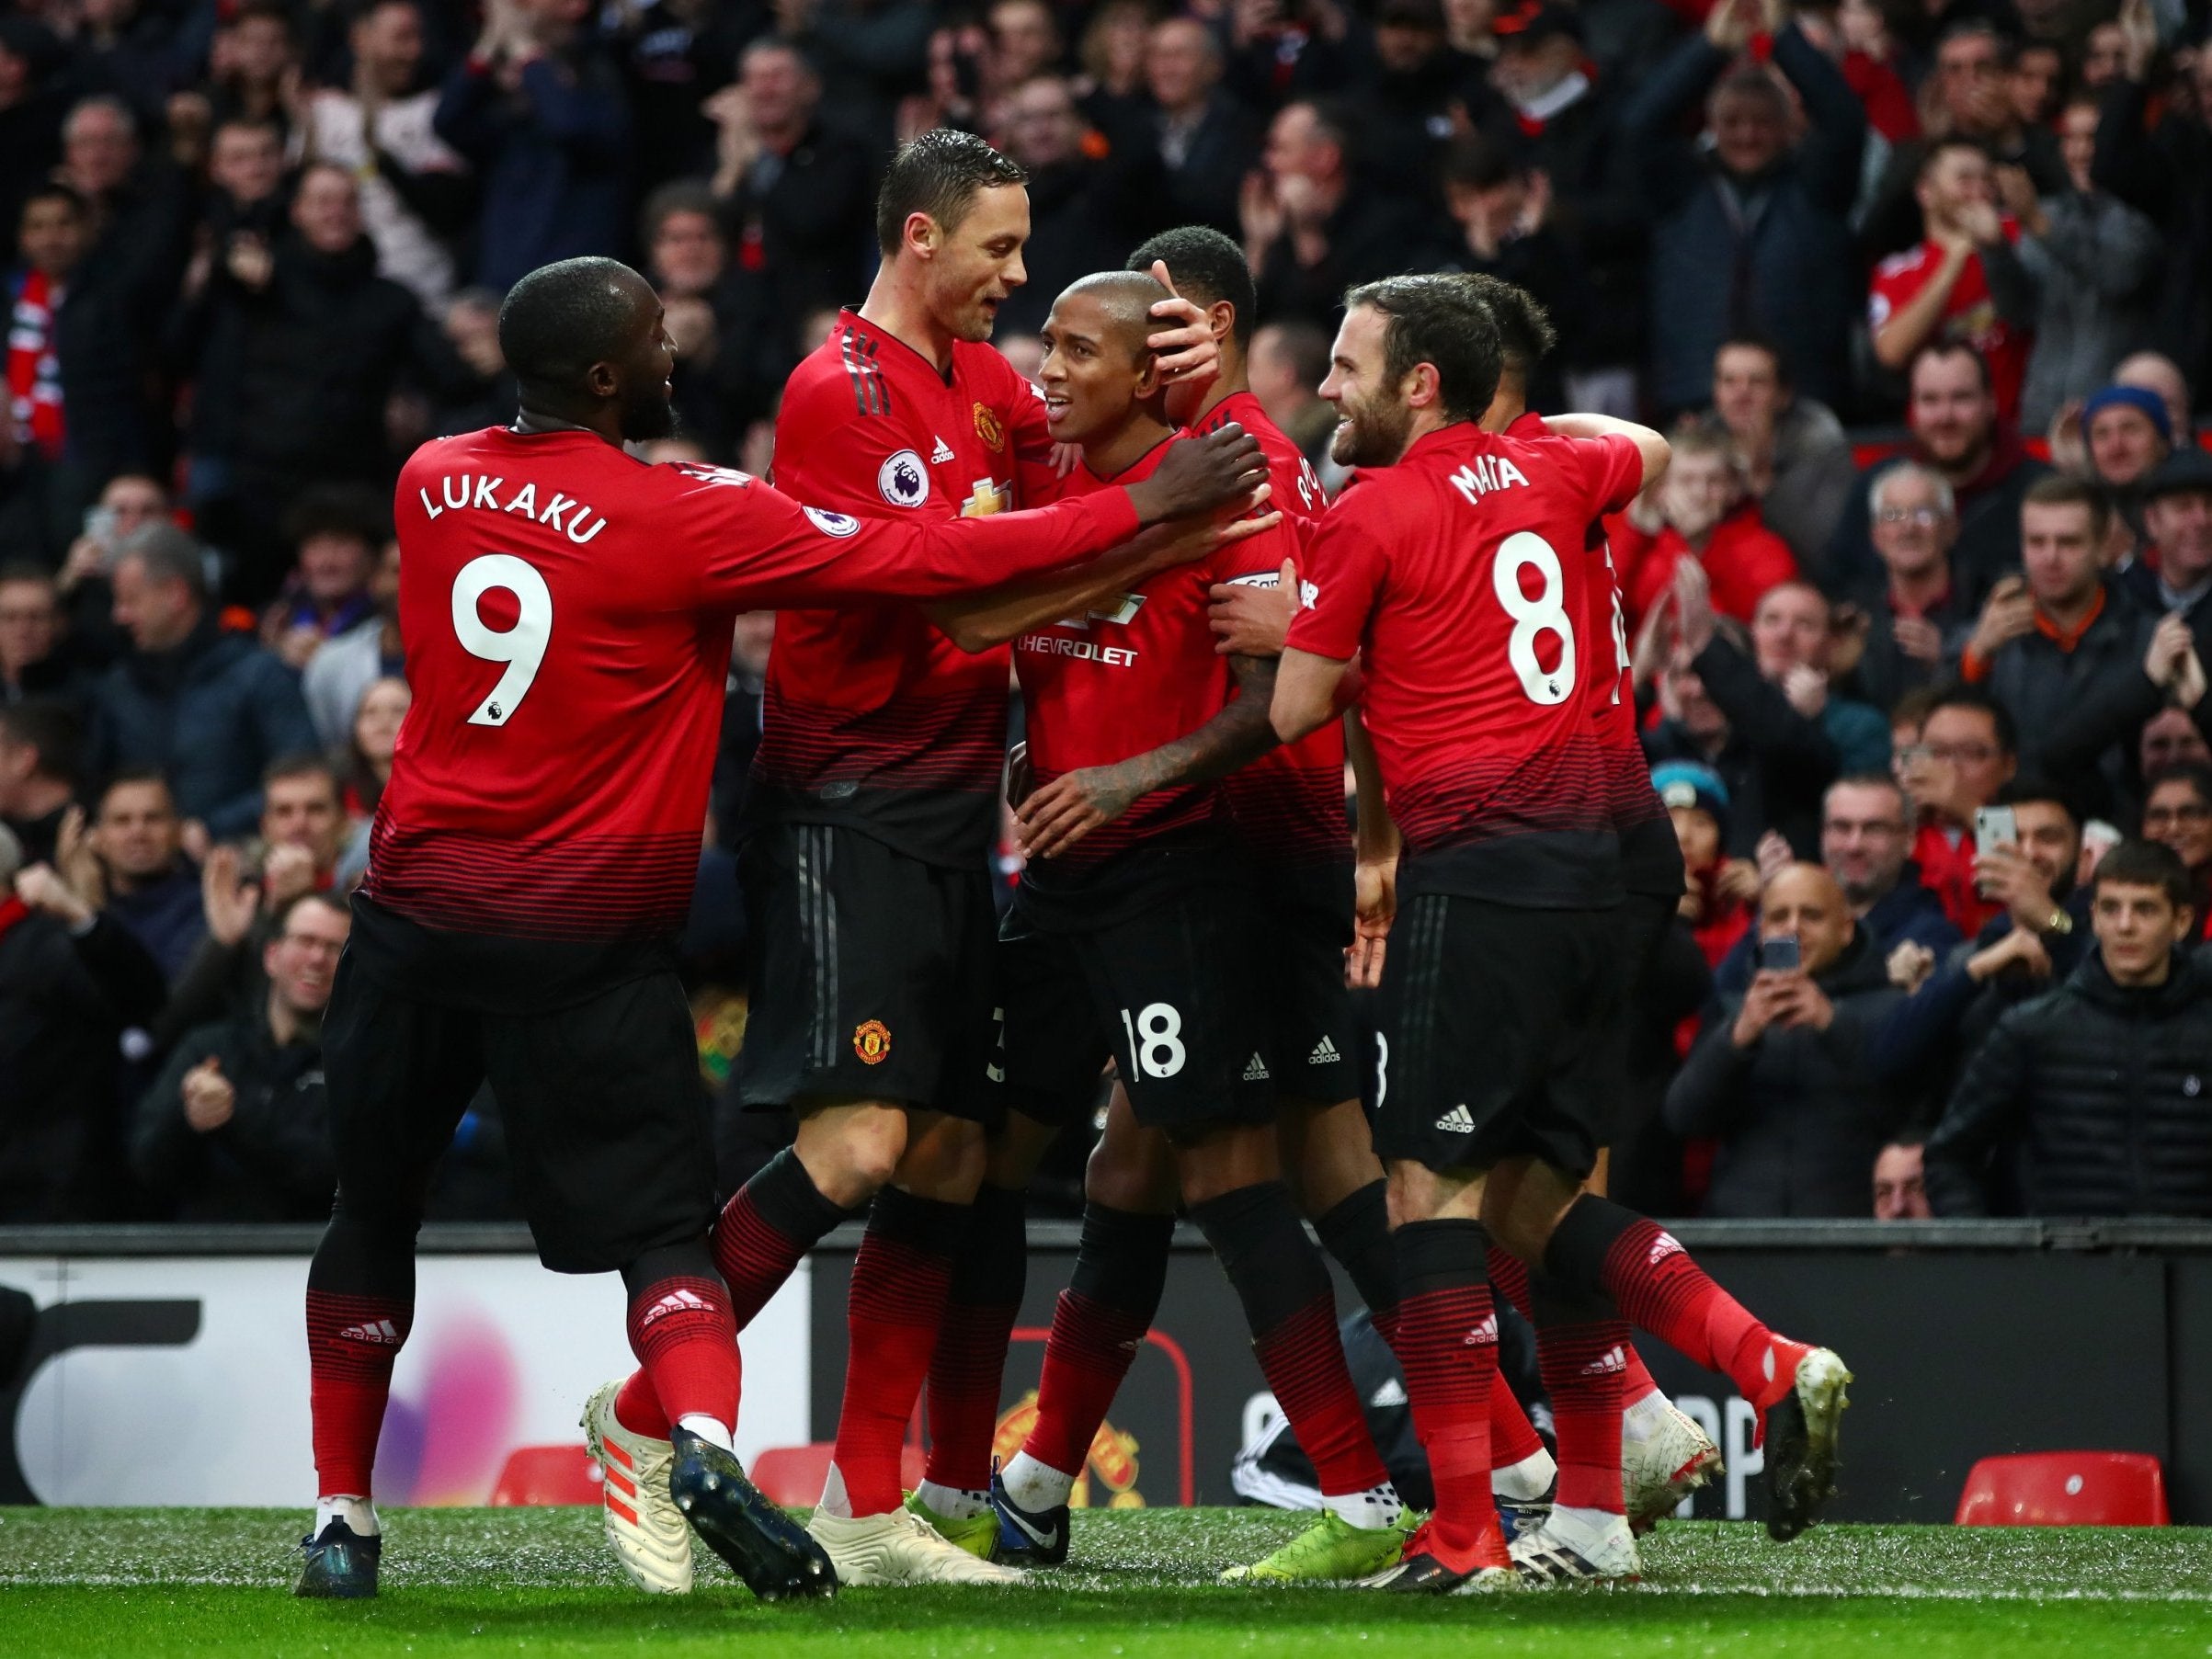 United players congratulate Ashley Young after his early goal